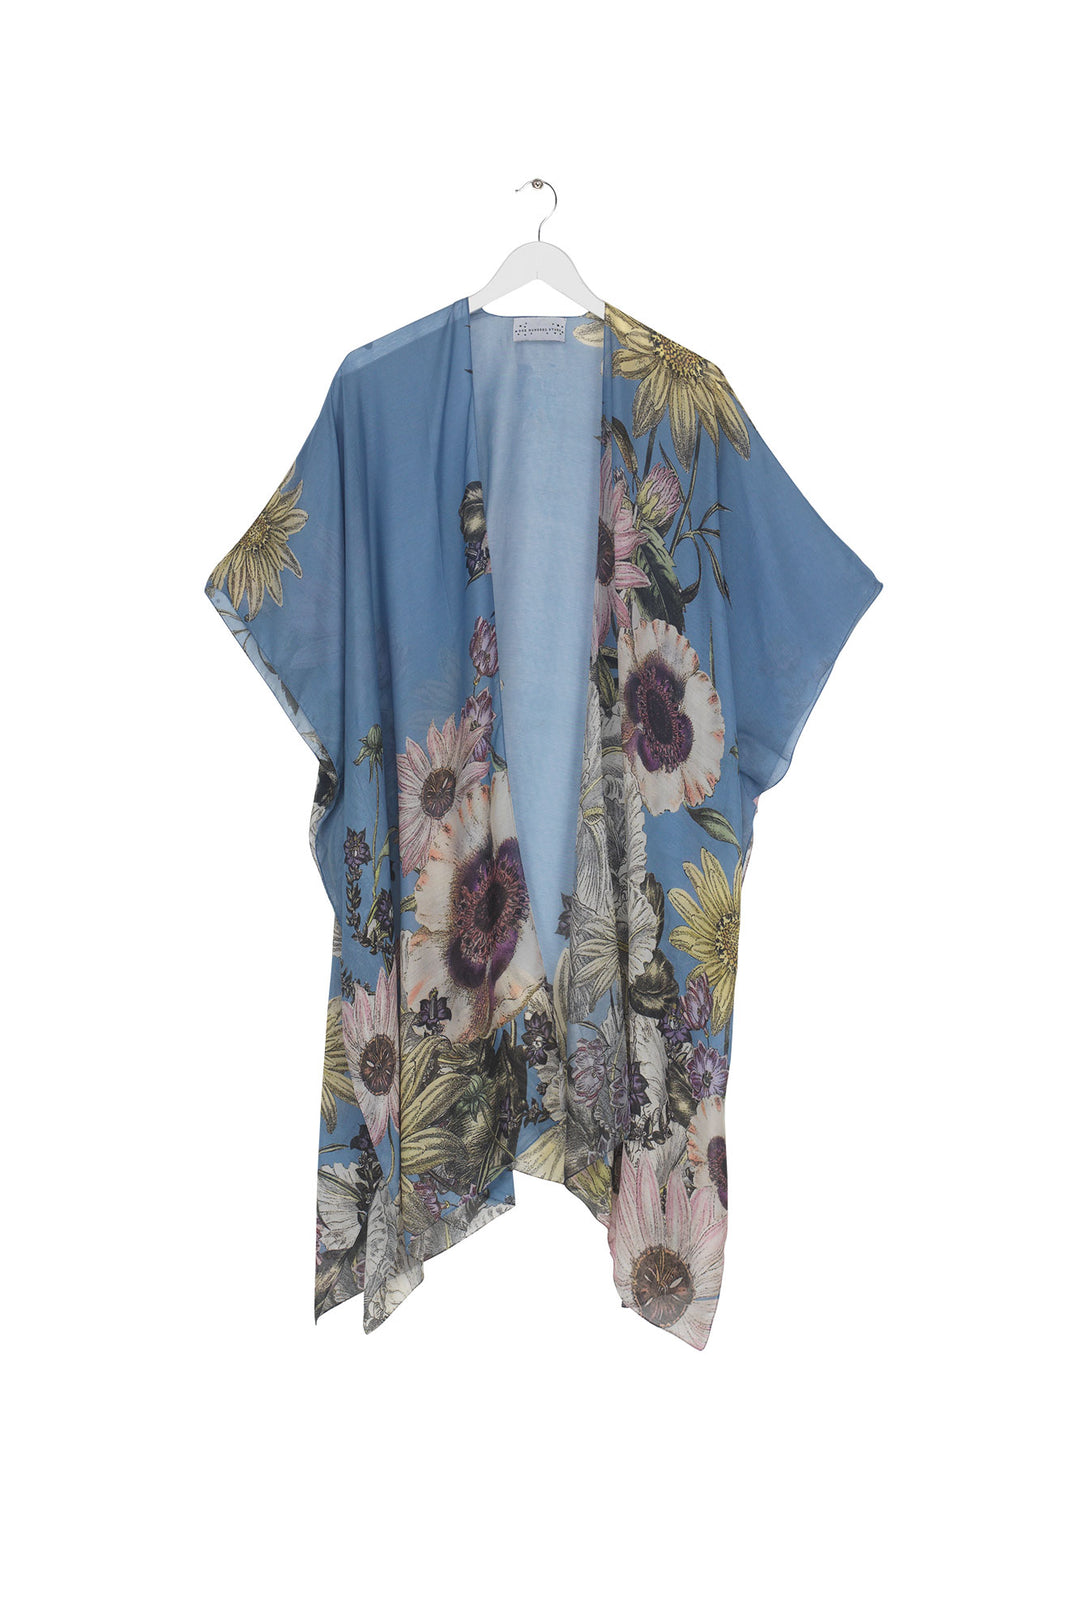 Women's lightweight throwover shawl in cornflower blue with daisy floral print by One Hundred Stars